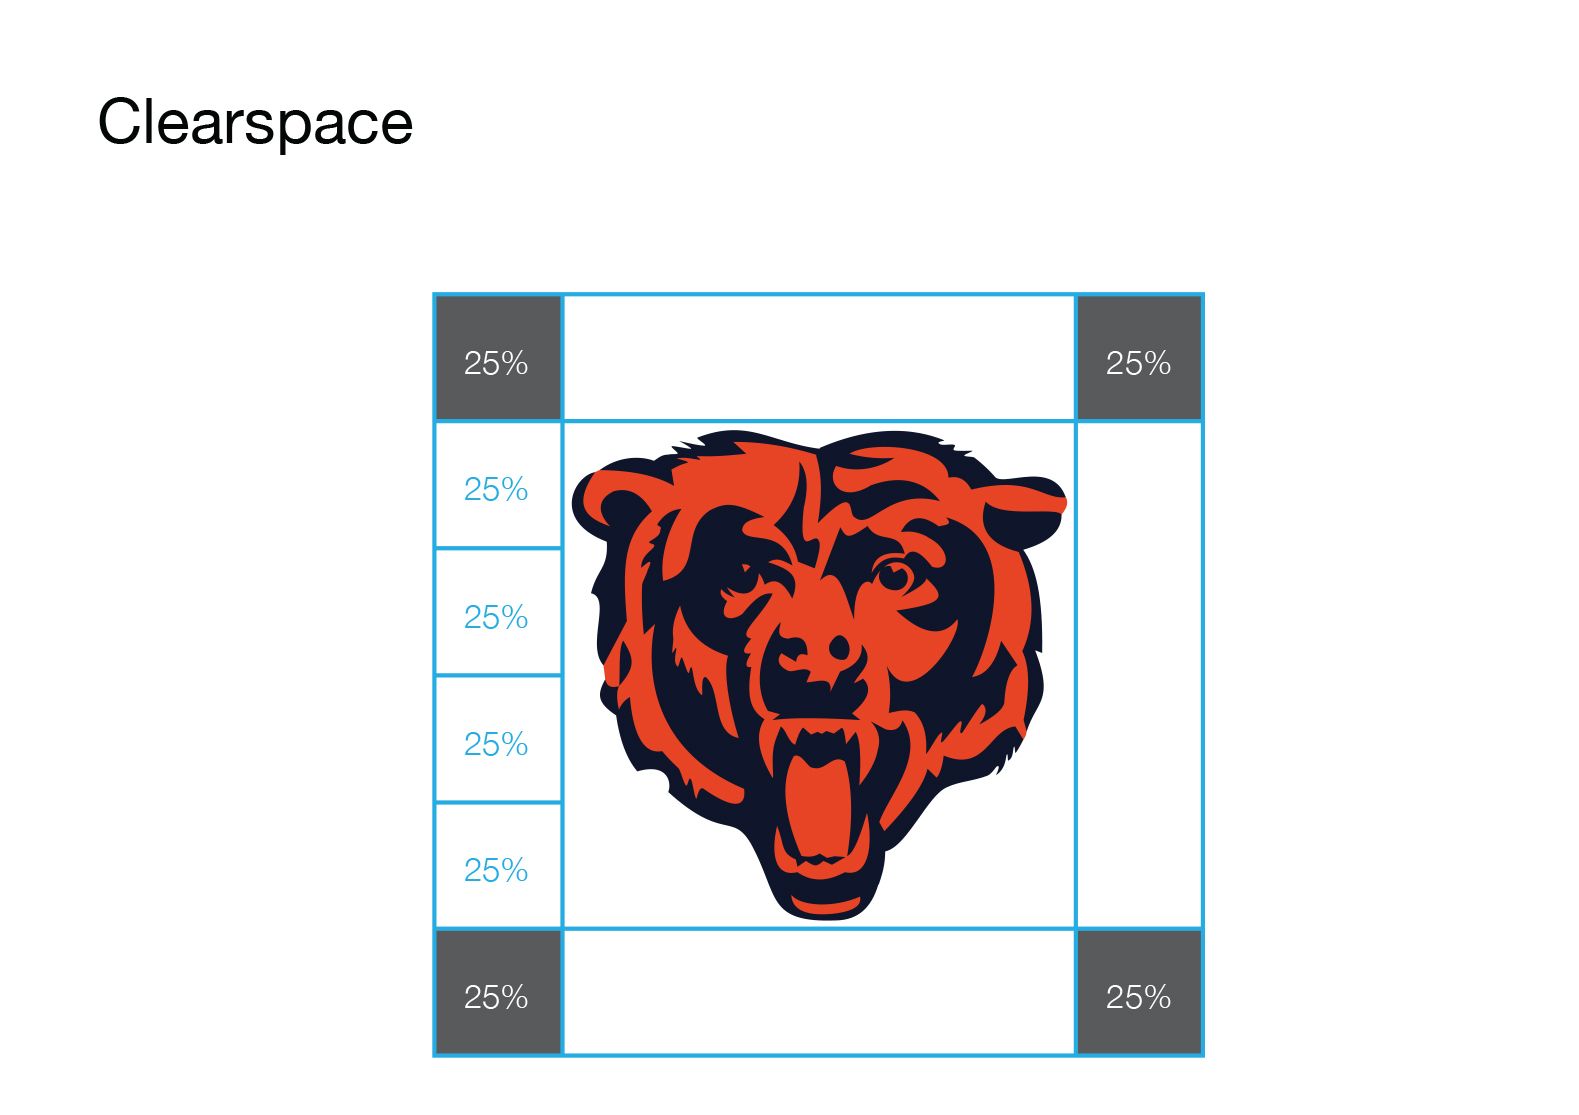 Chicago Bears Colors - Hex and RGB Color Codes